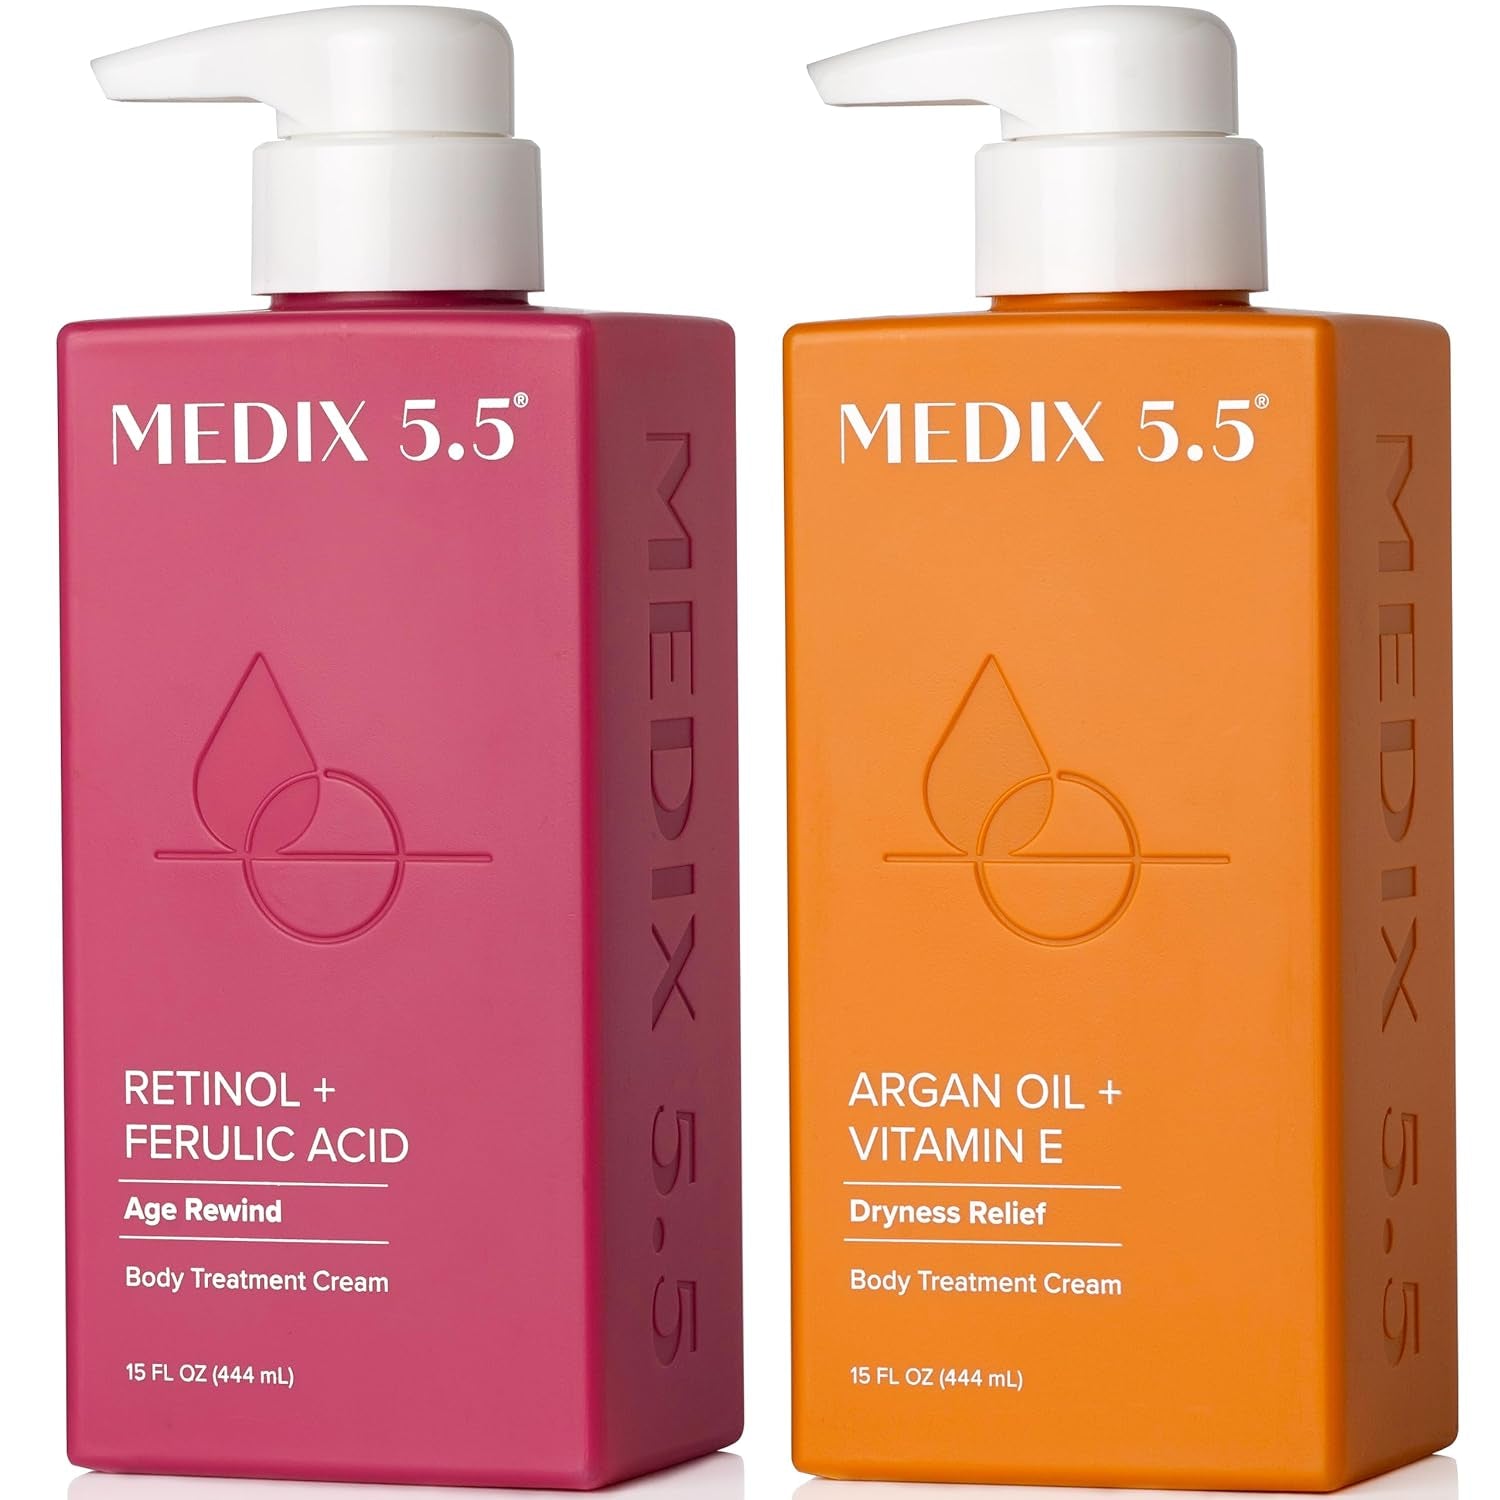 Medix 5.5 Retinol and Collagen Skin Care Set with Firming Body Lotion - 2PC Bundle